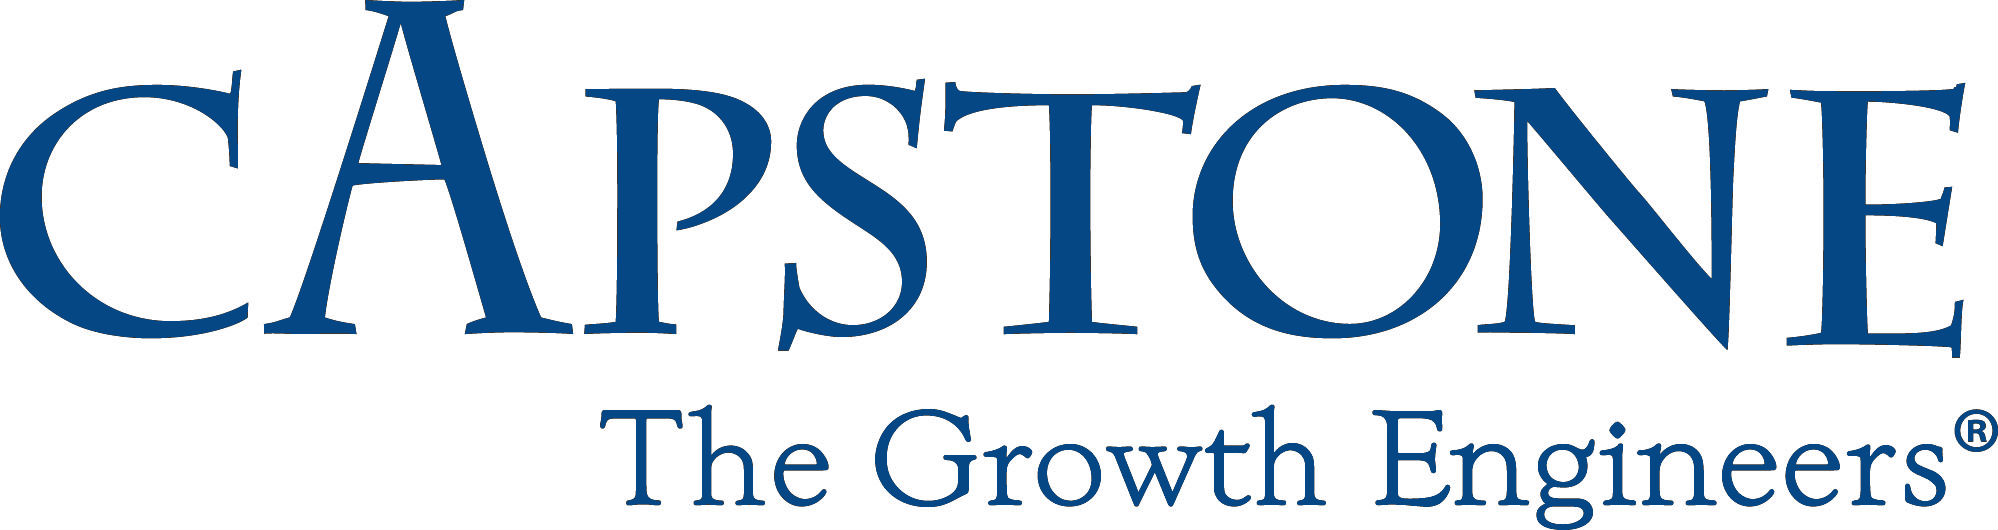 Capstone is a leading management consulting firm located outside of Washington DC specializing in corporate growth strategies, primarily Mergers & Acquisitions for the middle market.